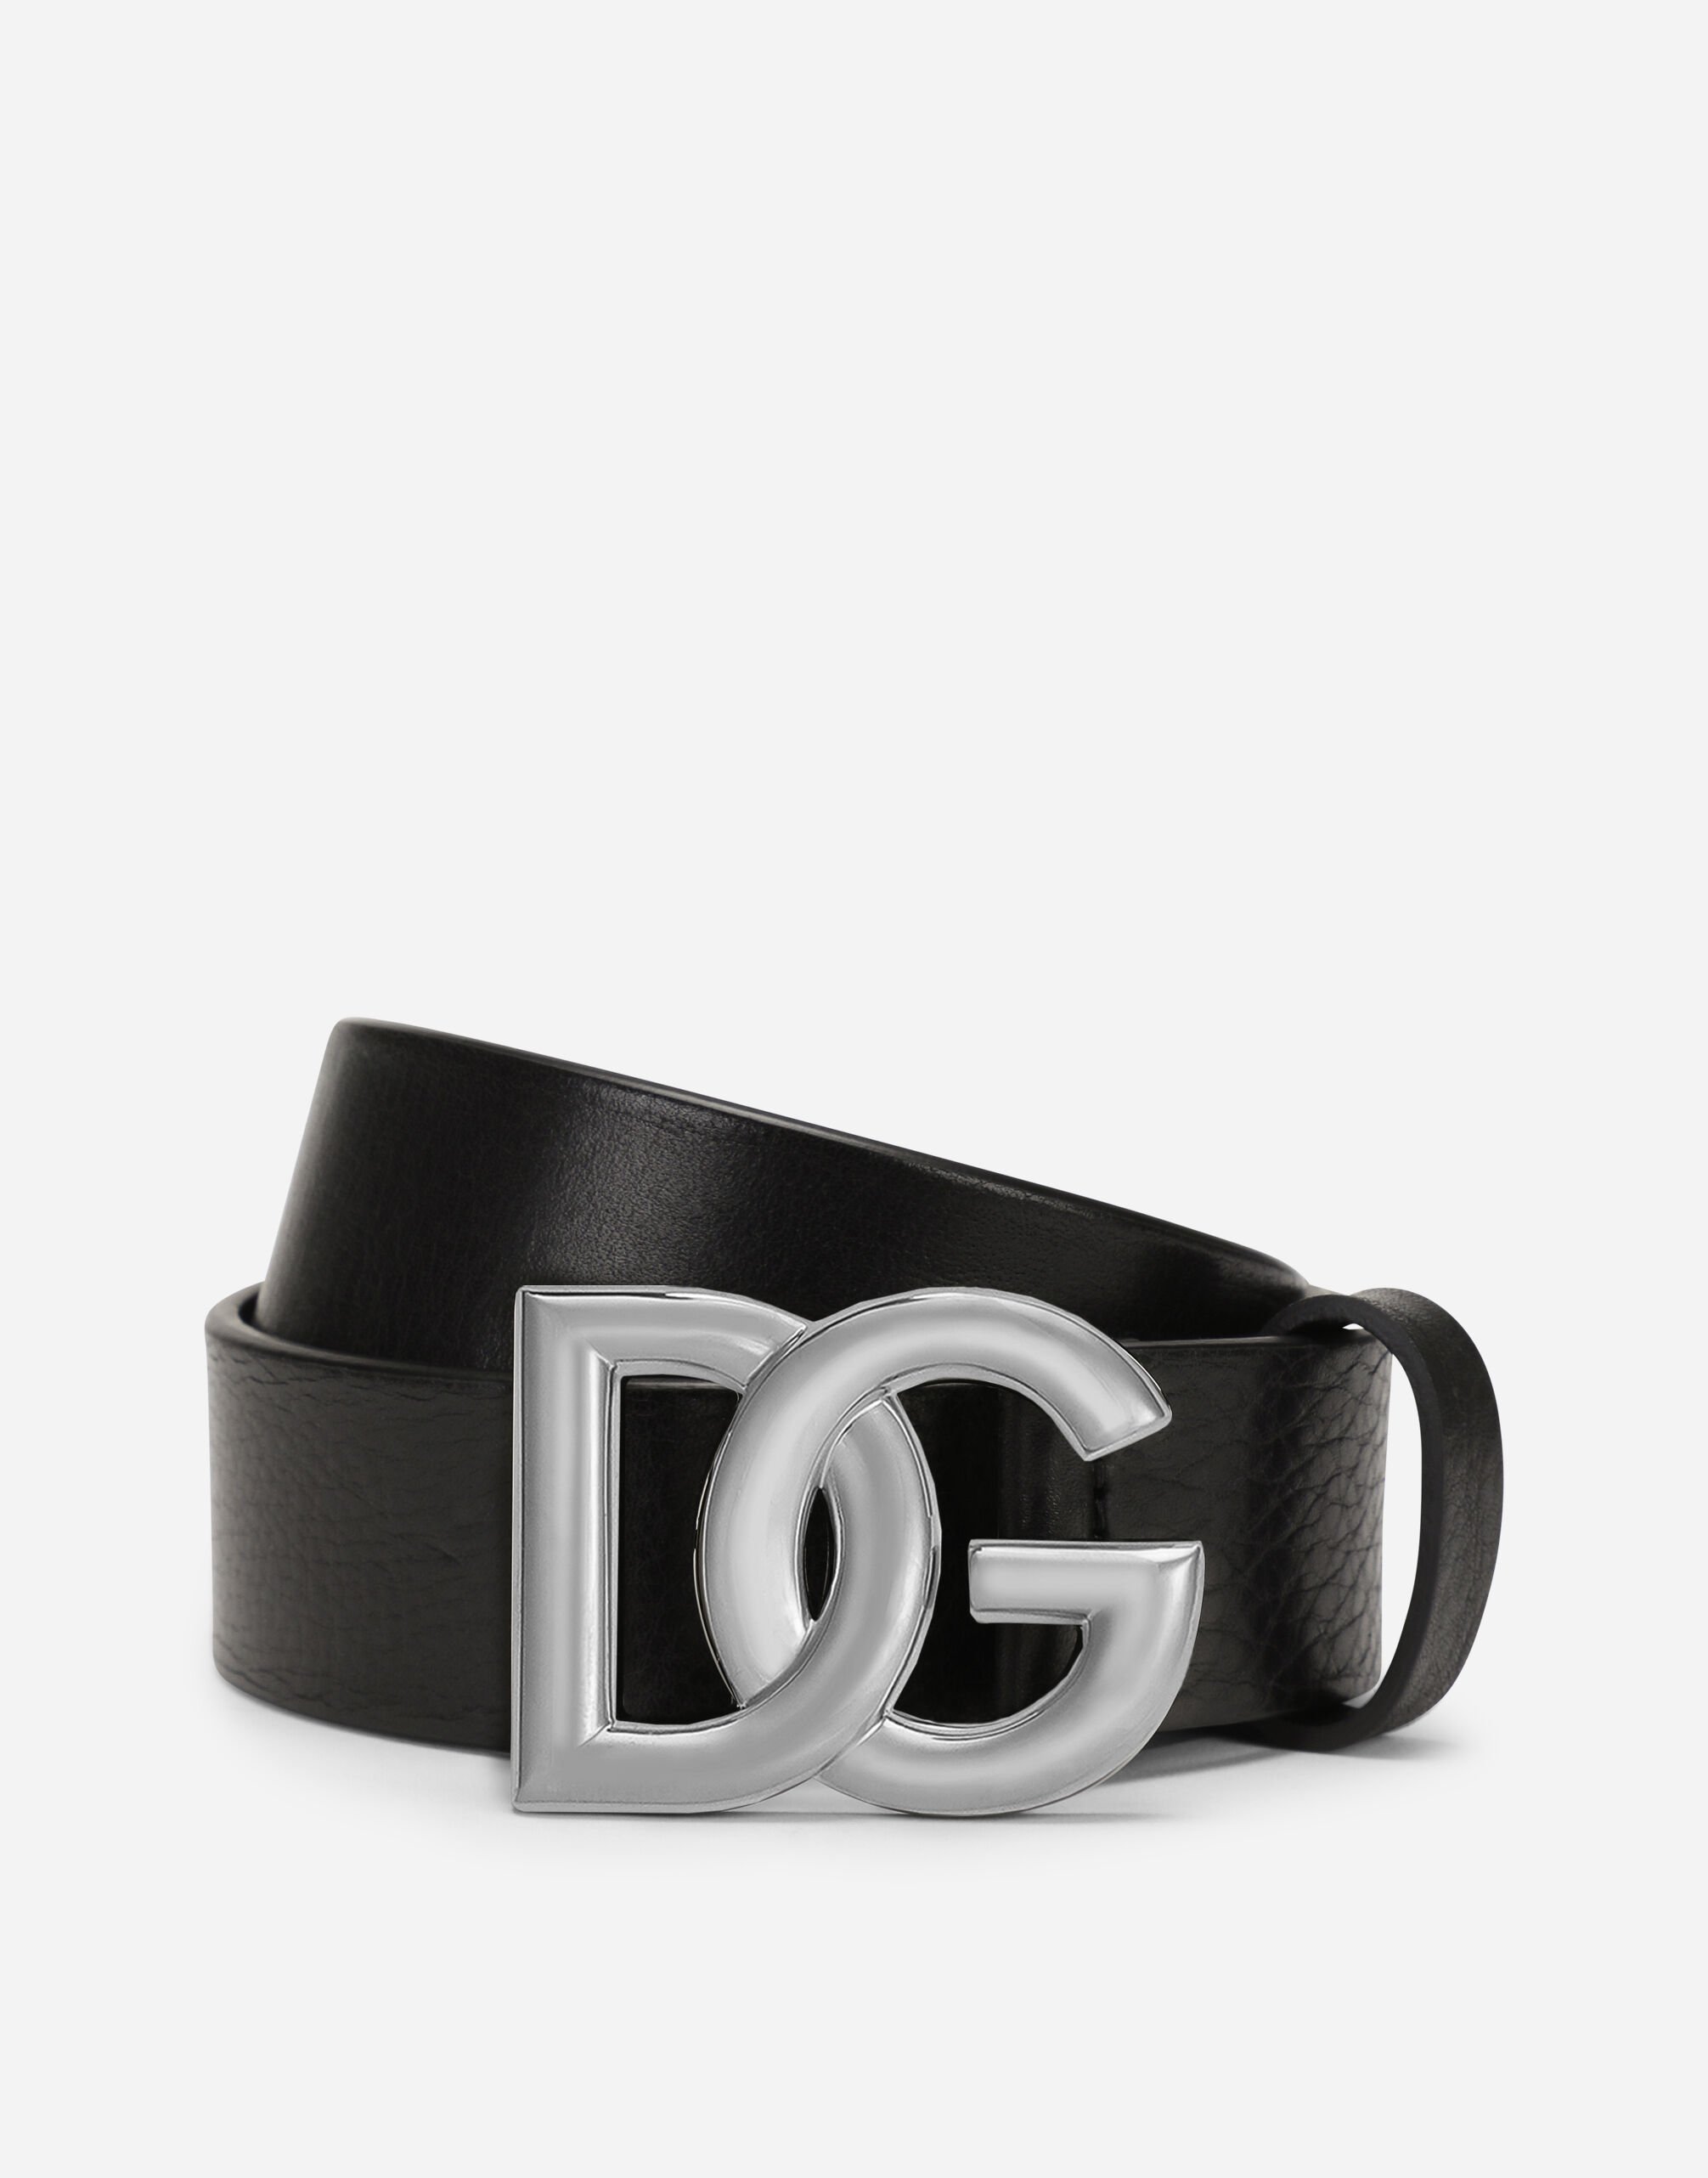 Dolce & Gabbana Tumbled leather belt with crossover DG logo buckle Black WWJE1GWSB03